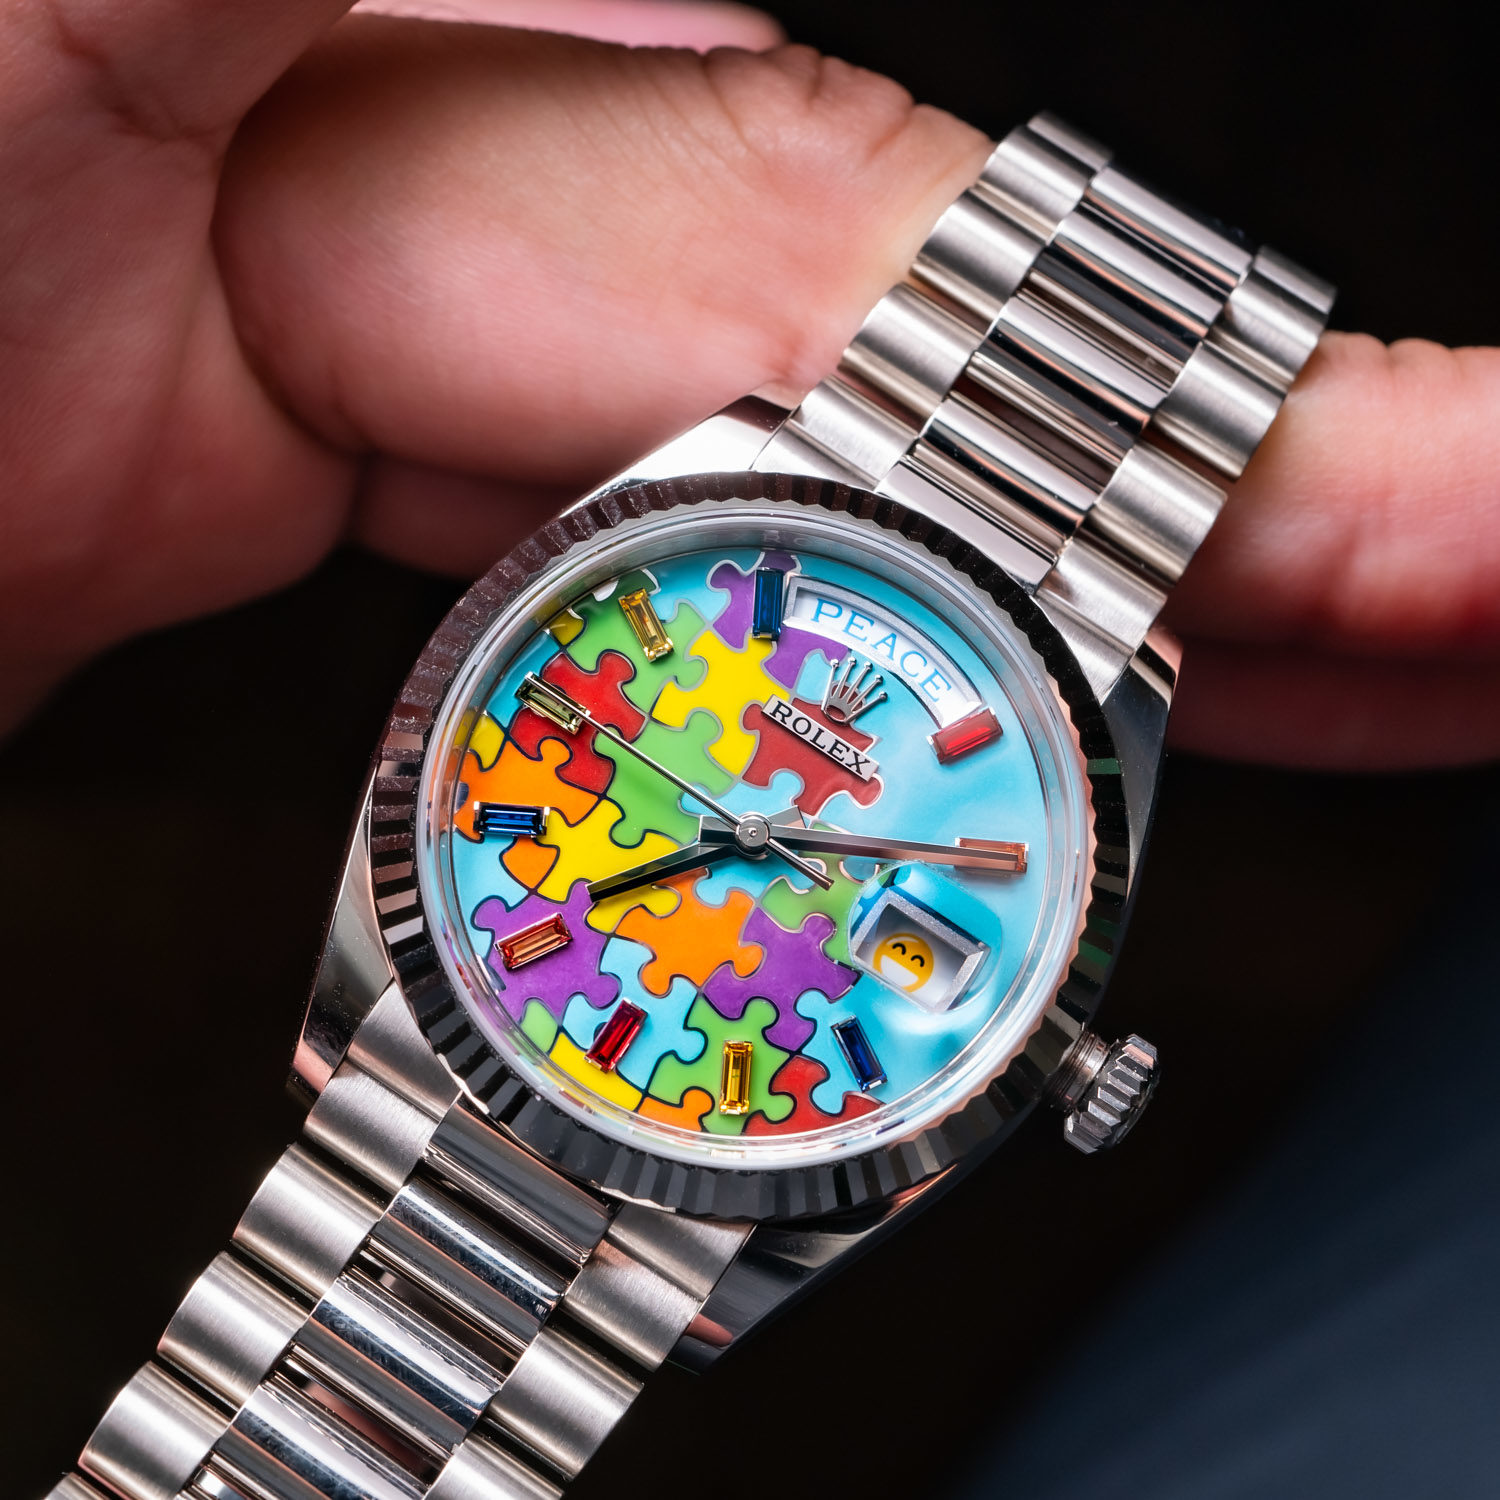 Rolex day-date 36 jigsaw puzzle